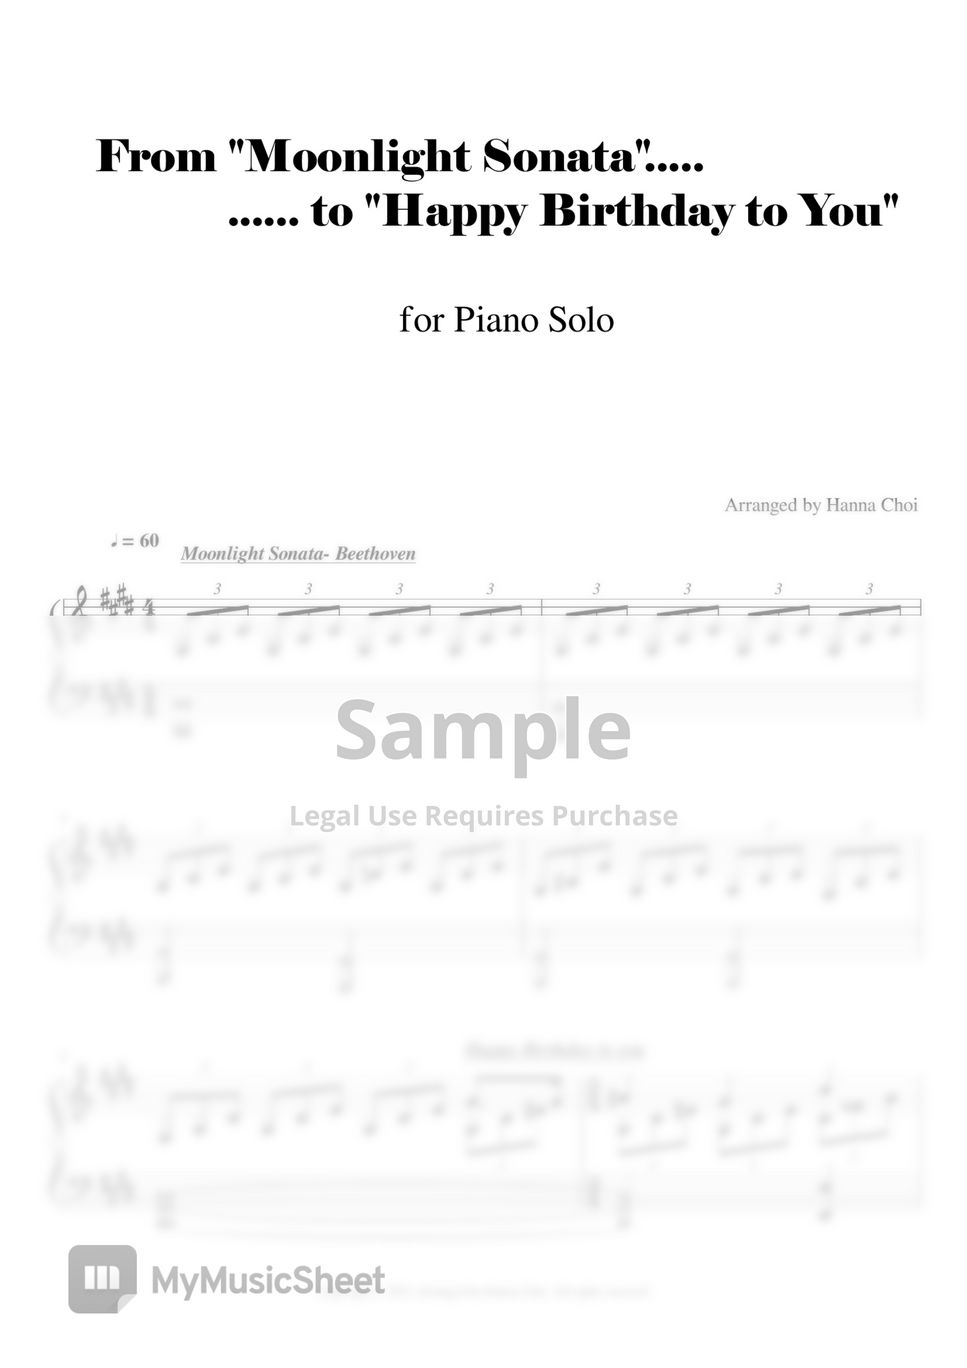 beethoven - Surprise! from "Beethoven- Moonlight Sonata" to " Happy Birthday to you" (for Piano solo) by YANGCHO